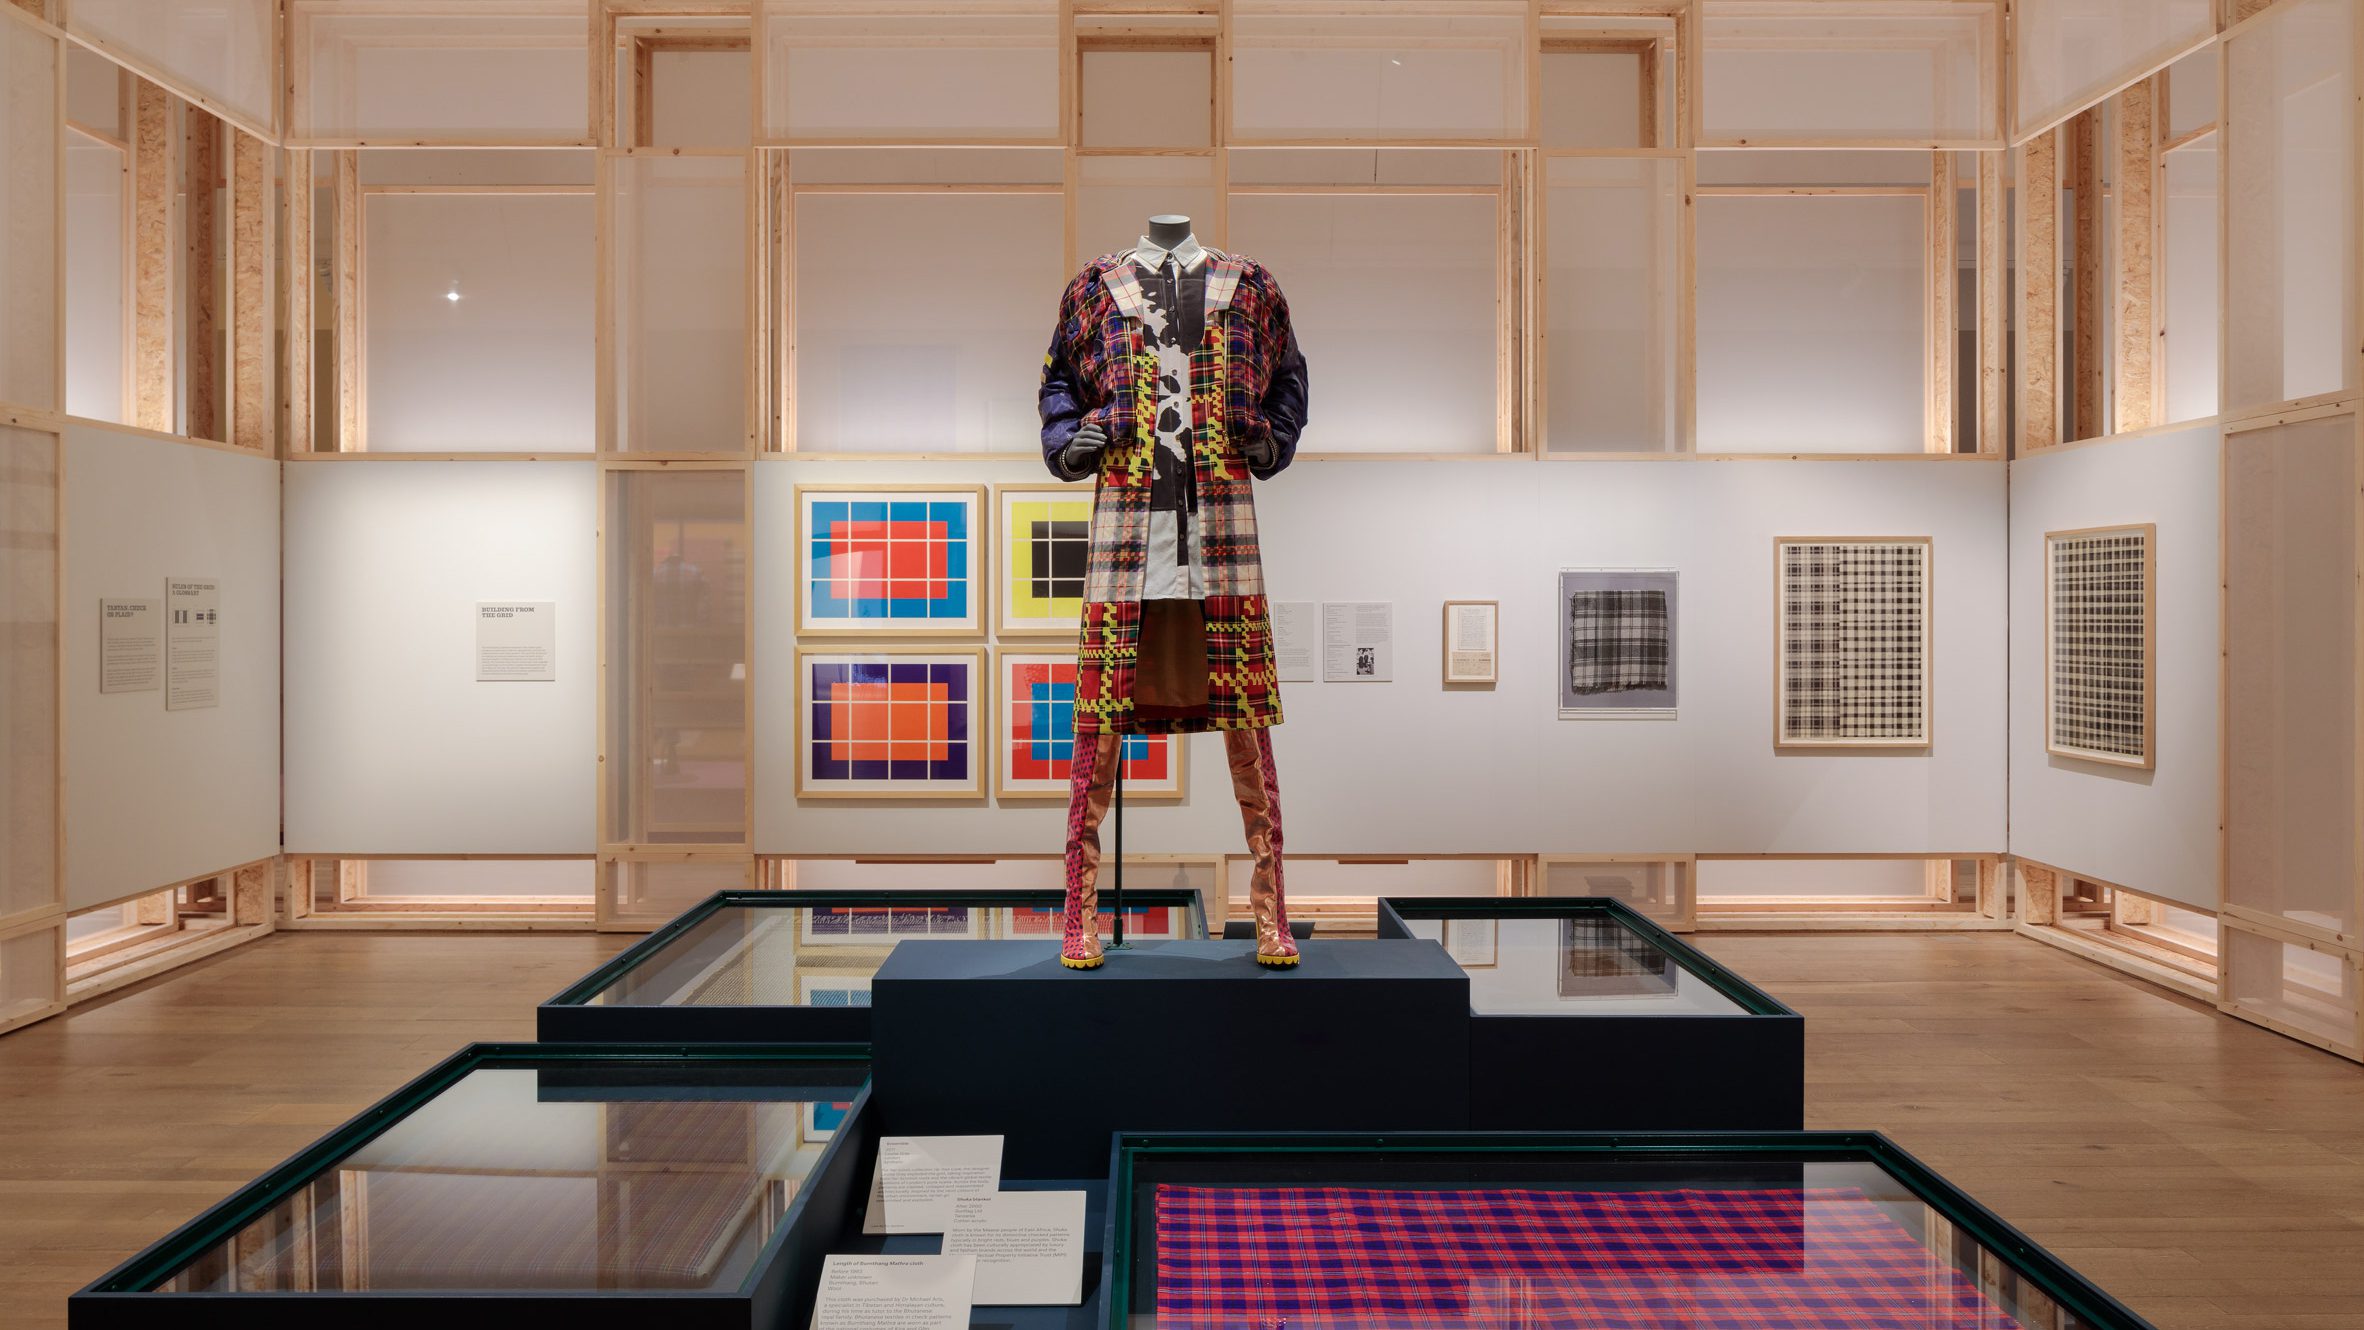 V&A Dundee exhibition busts some important myths about Tartan